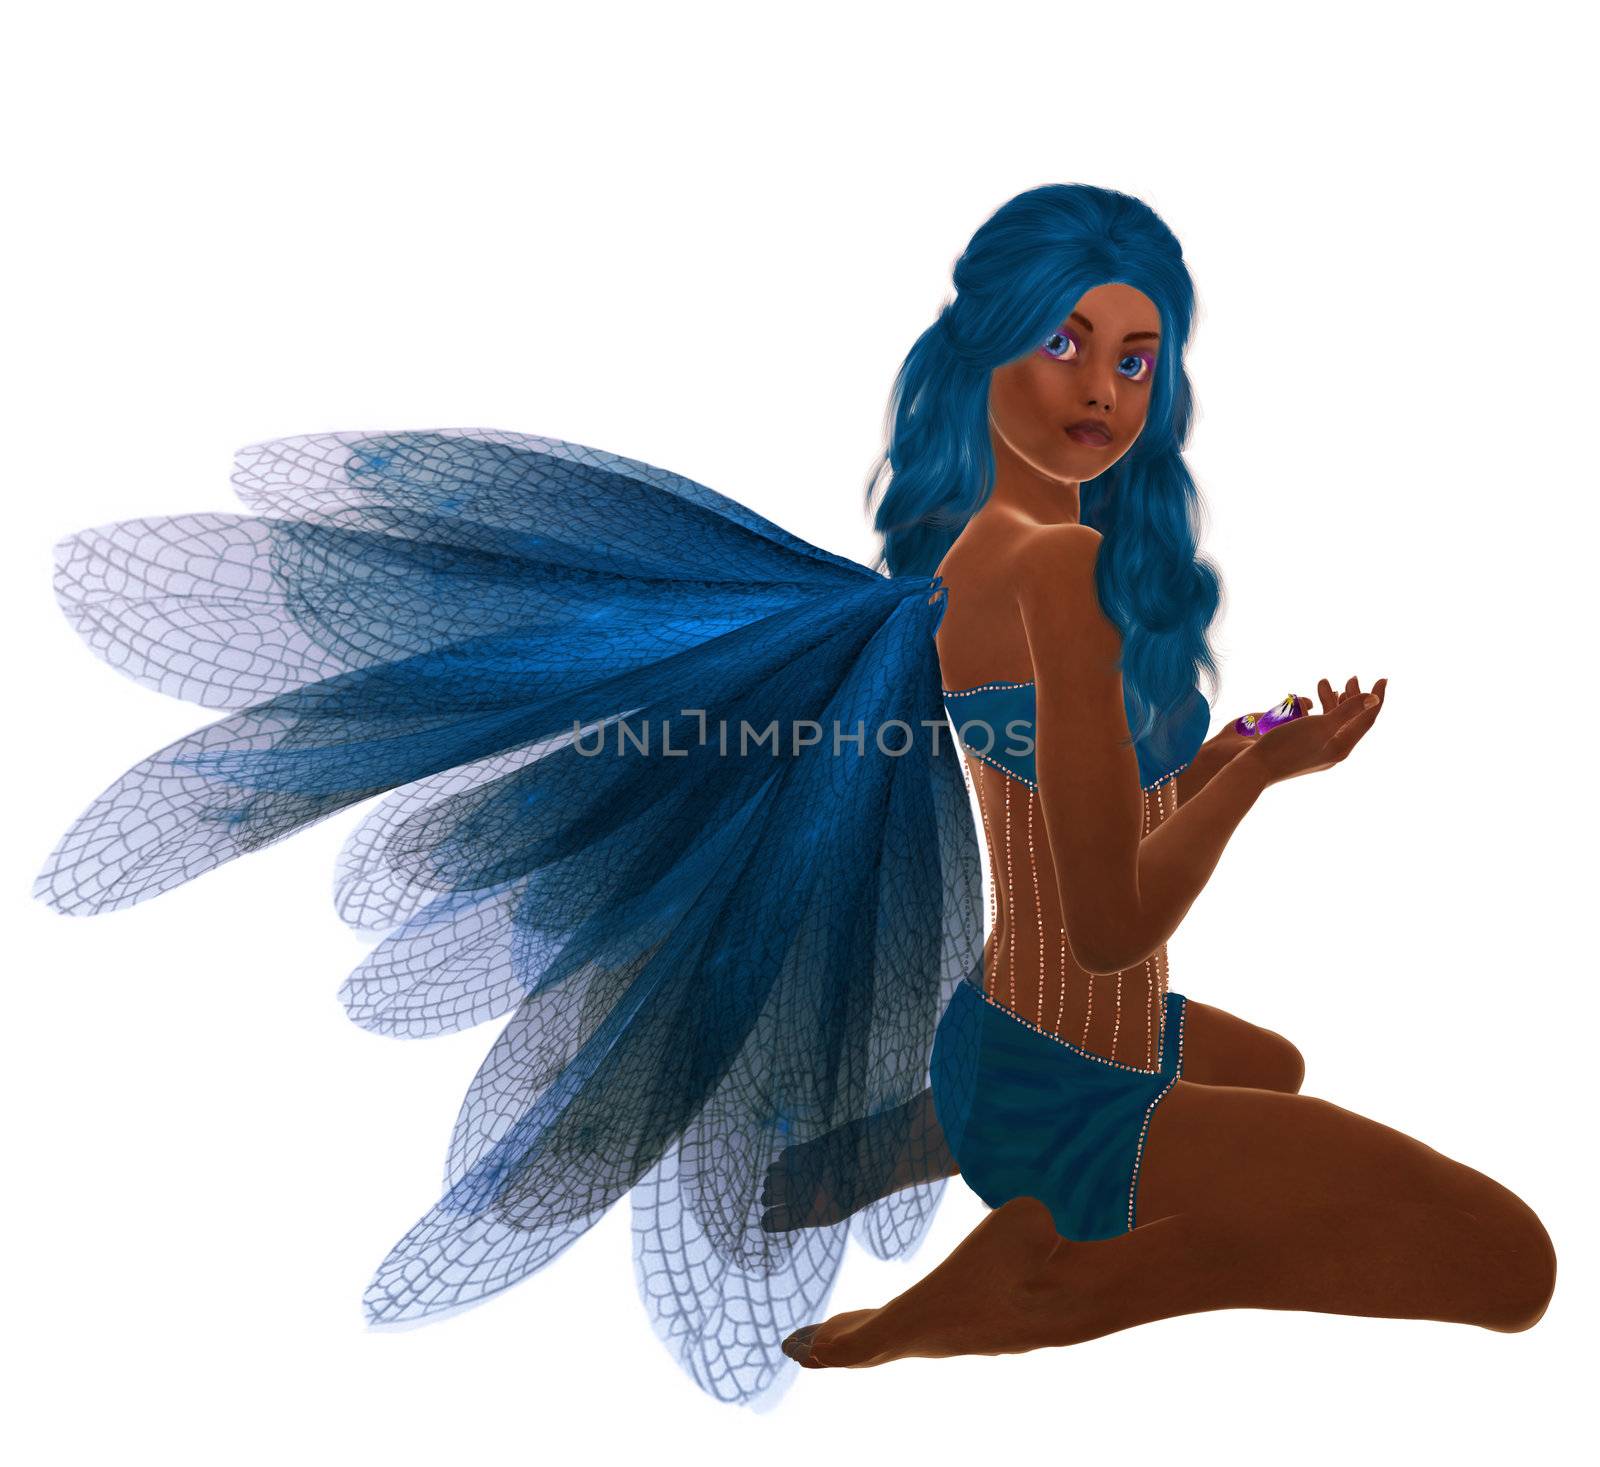 Blue fairy with blue hair, sitting holding flowers in her hand